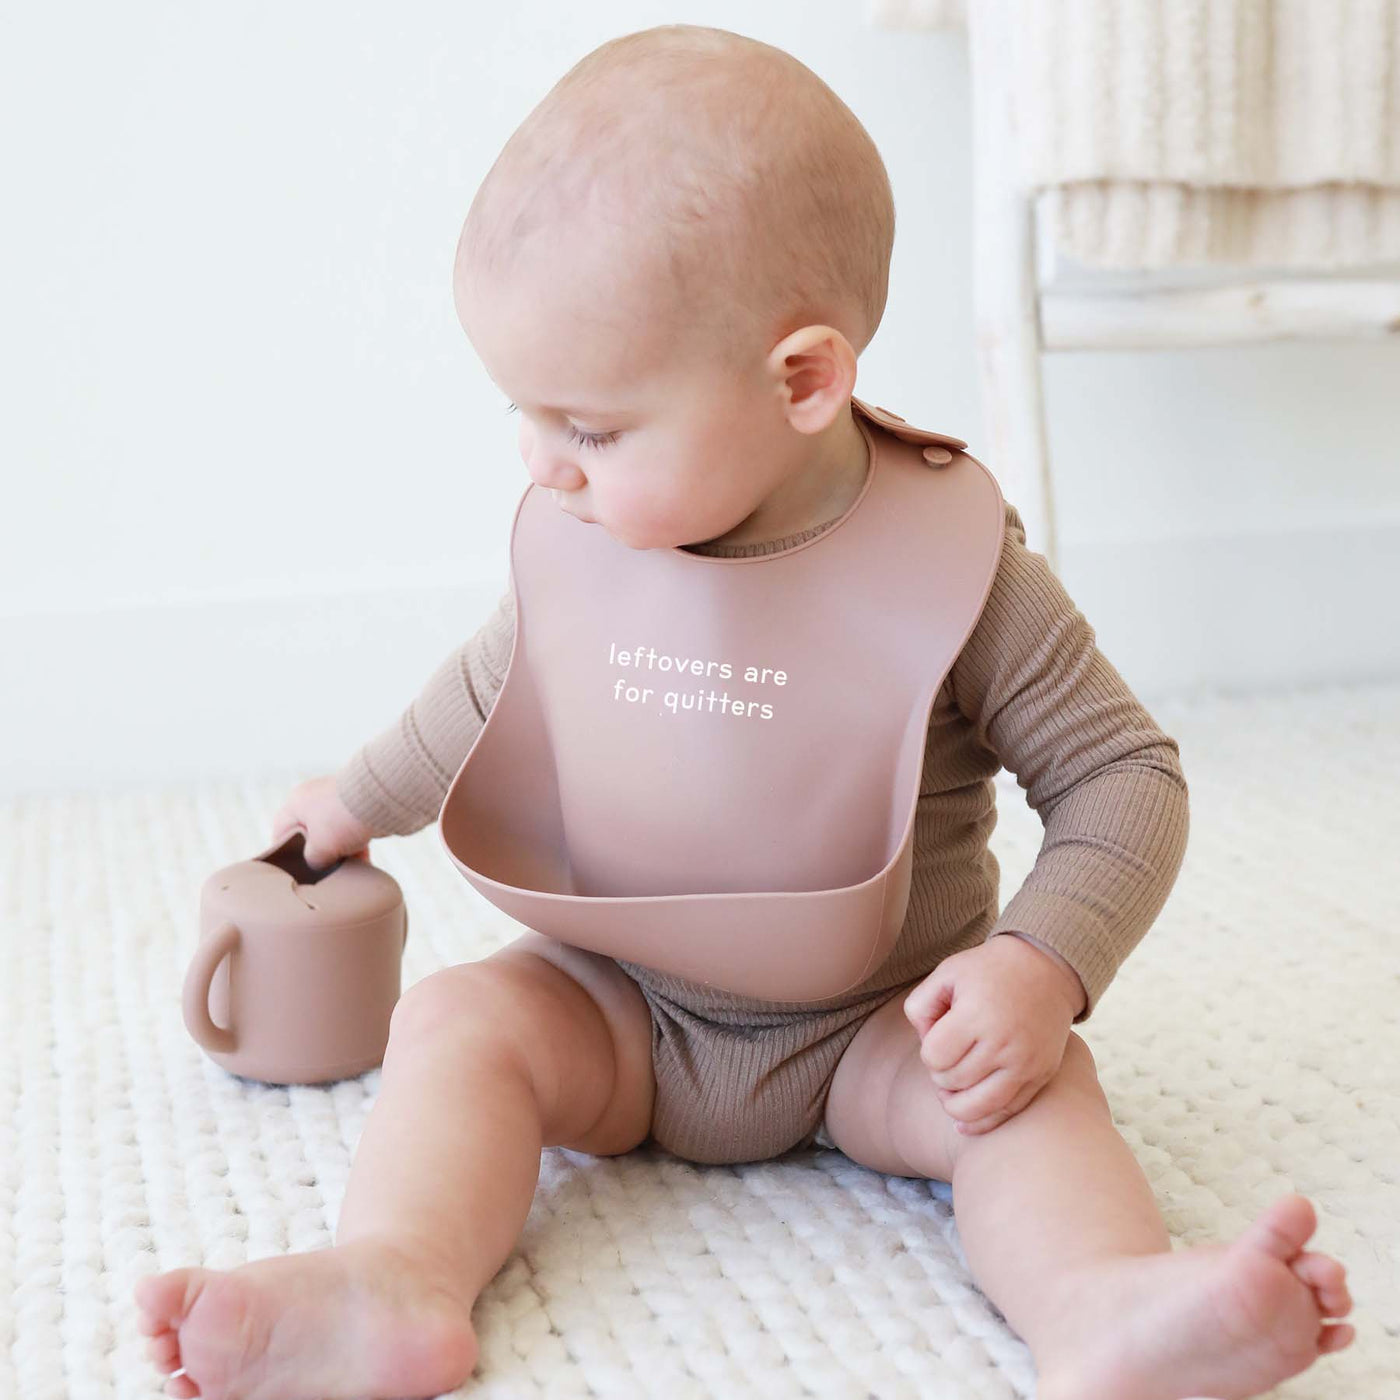 neutral baby bib with saying 